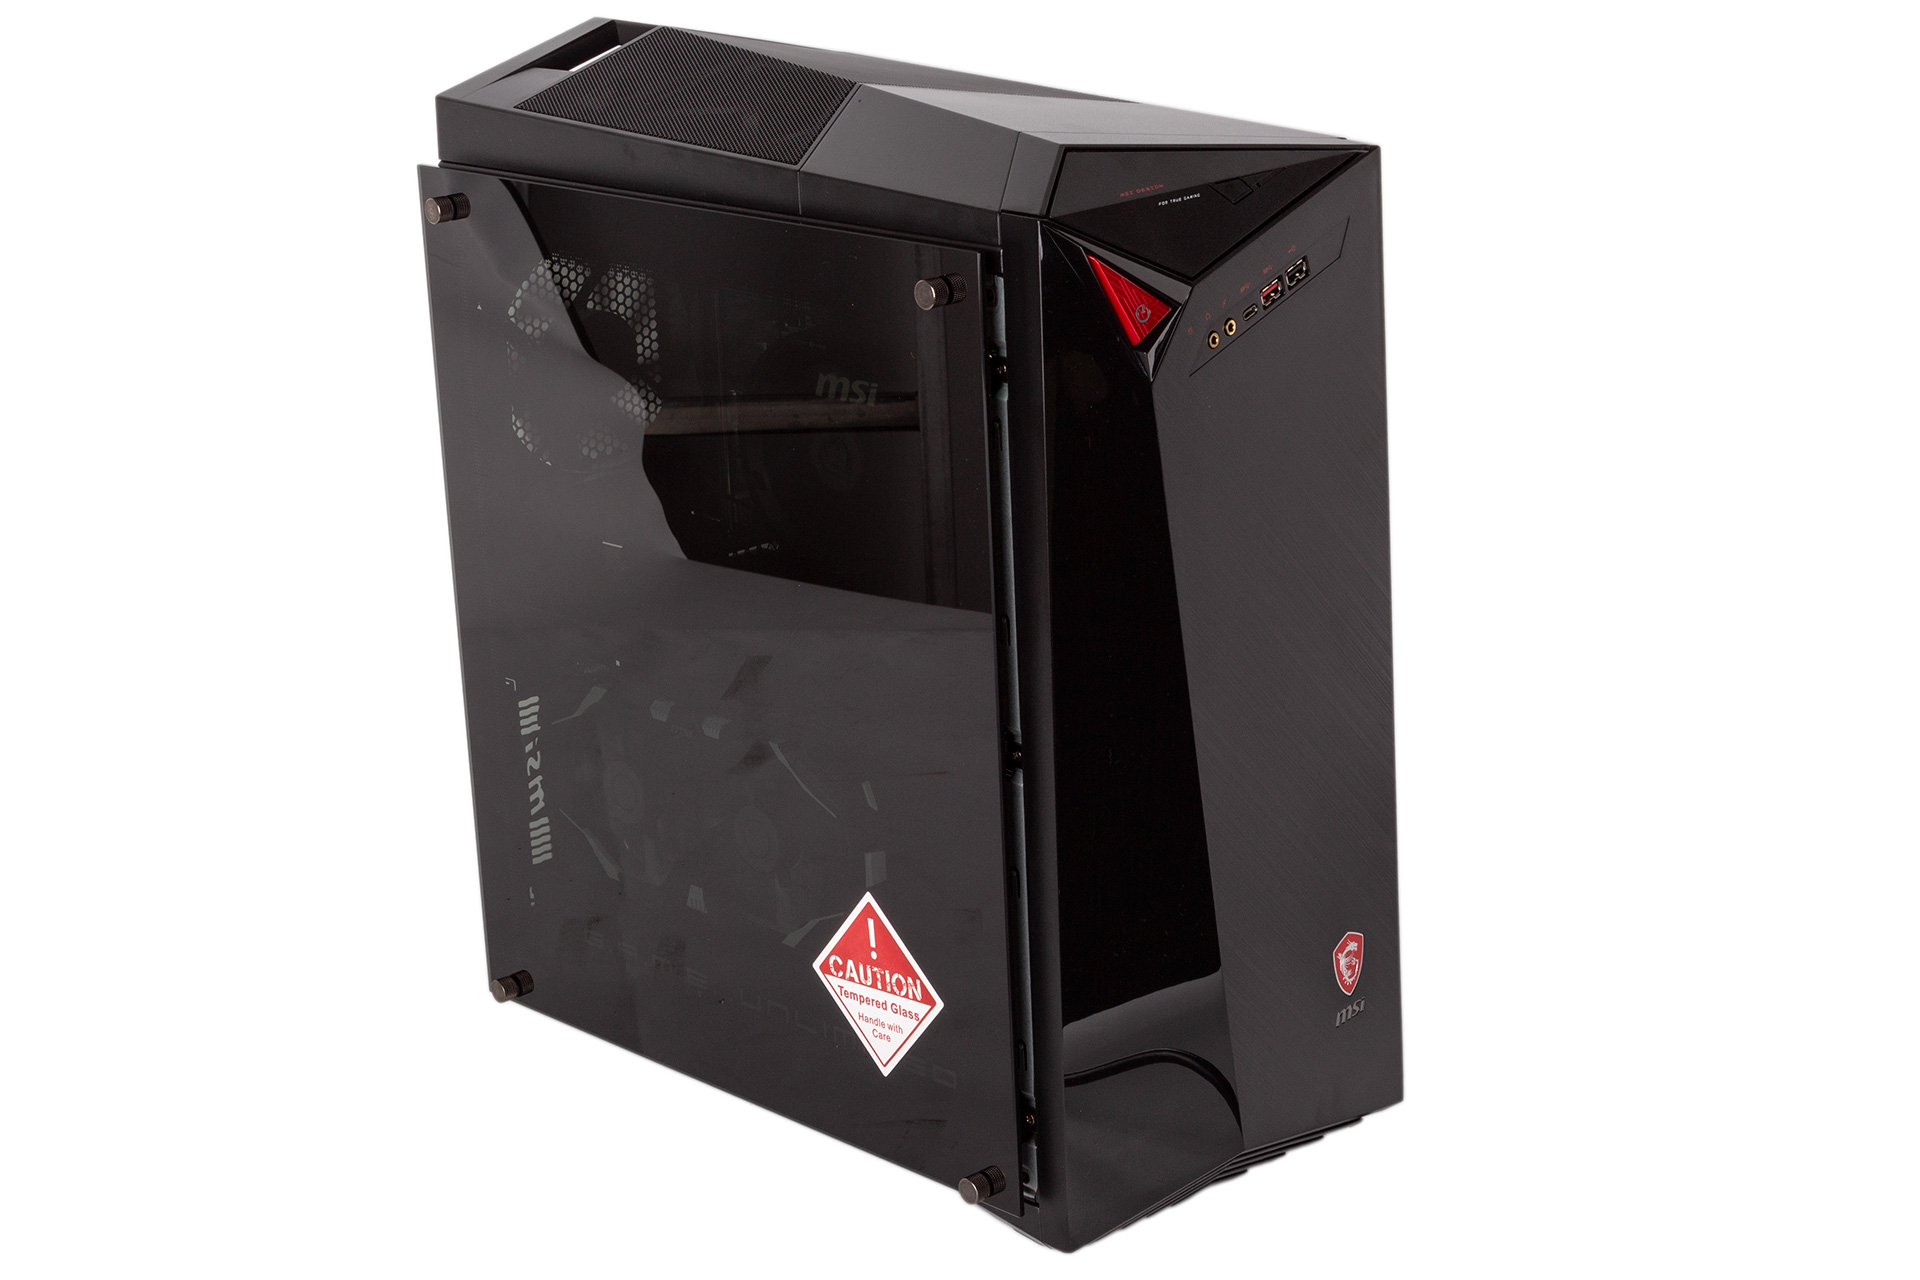 MSI Mid-Tower PC Gaming Case – Tempered Glass Side Panel – 4 x